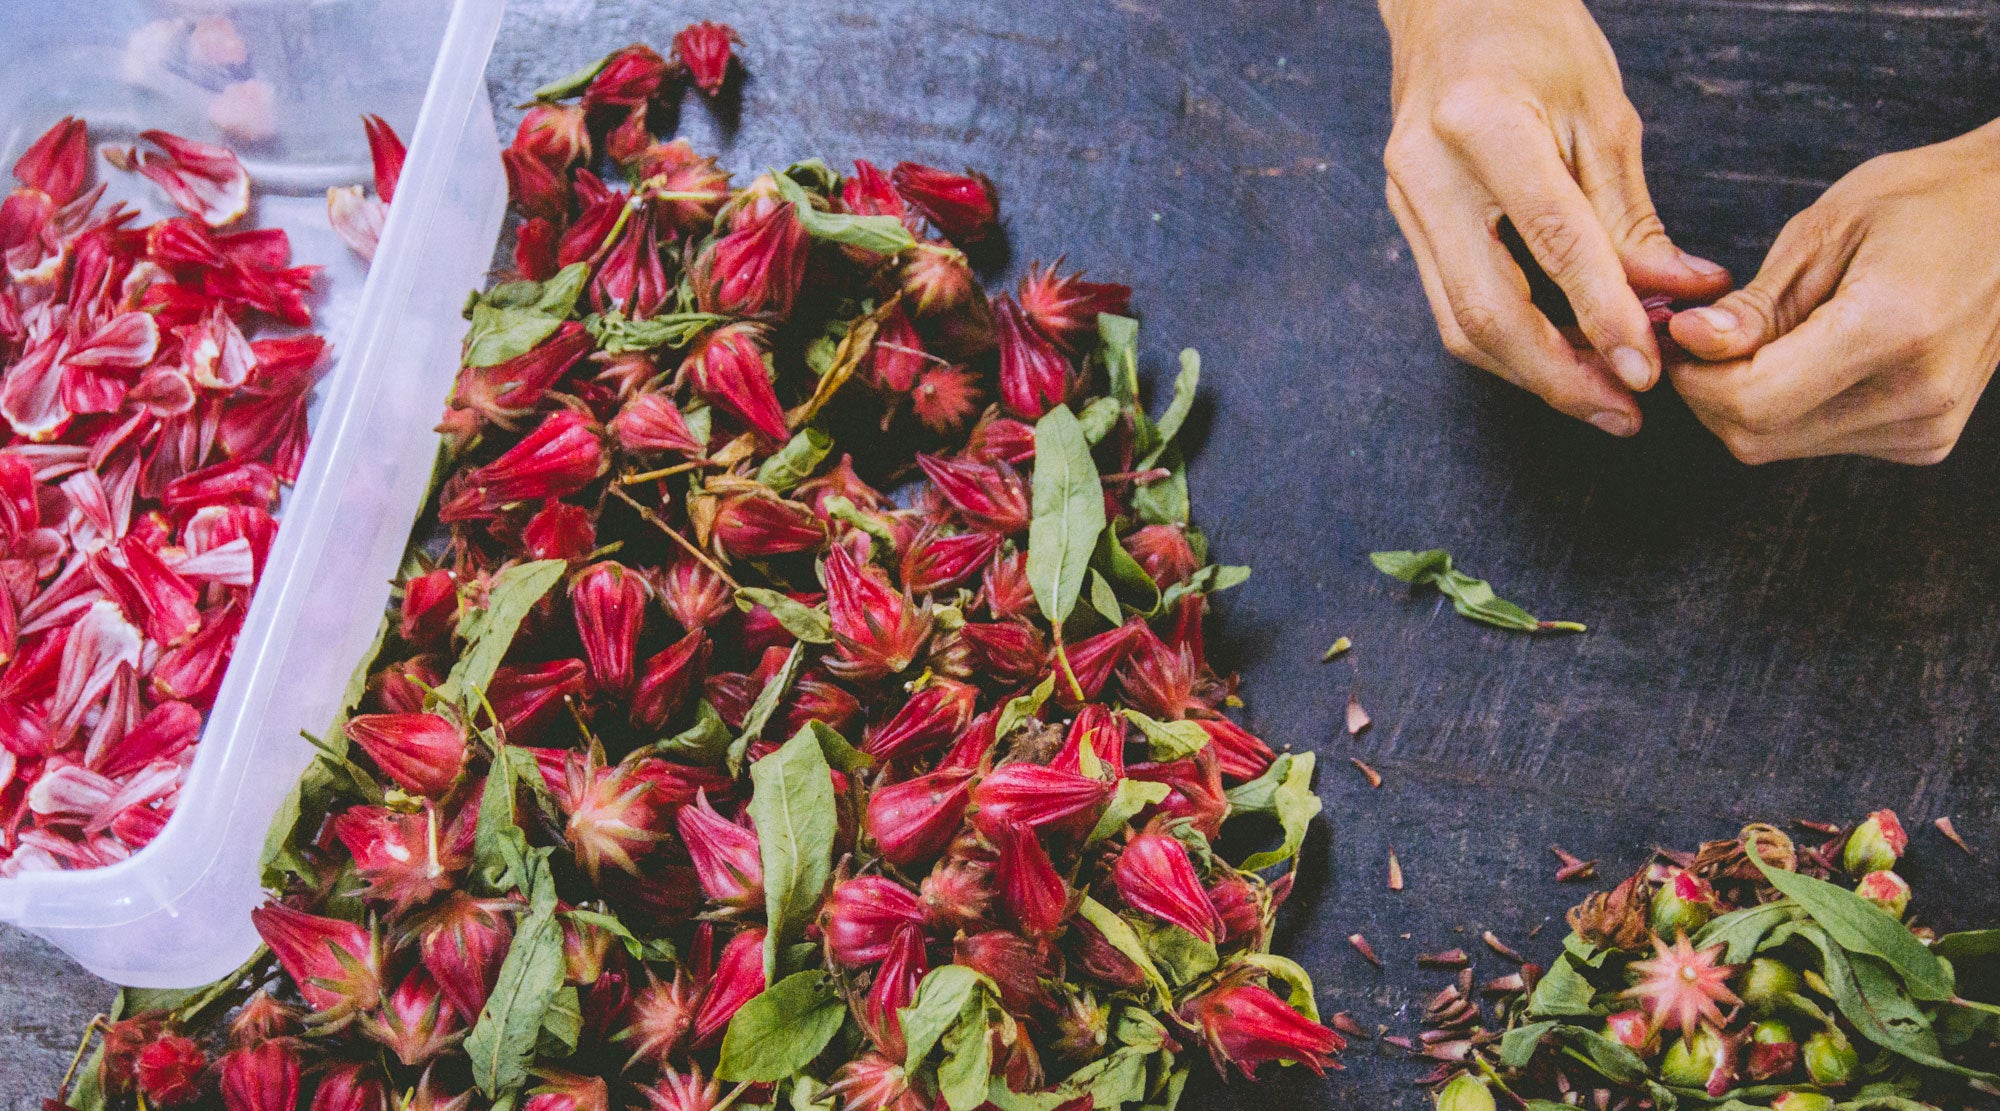 DIY: FLORAL DYEING WITH HIBISCUS PETALS